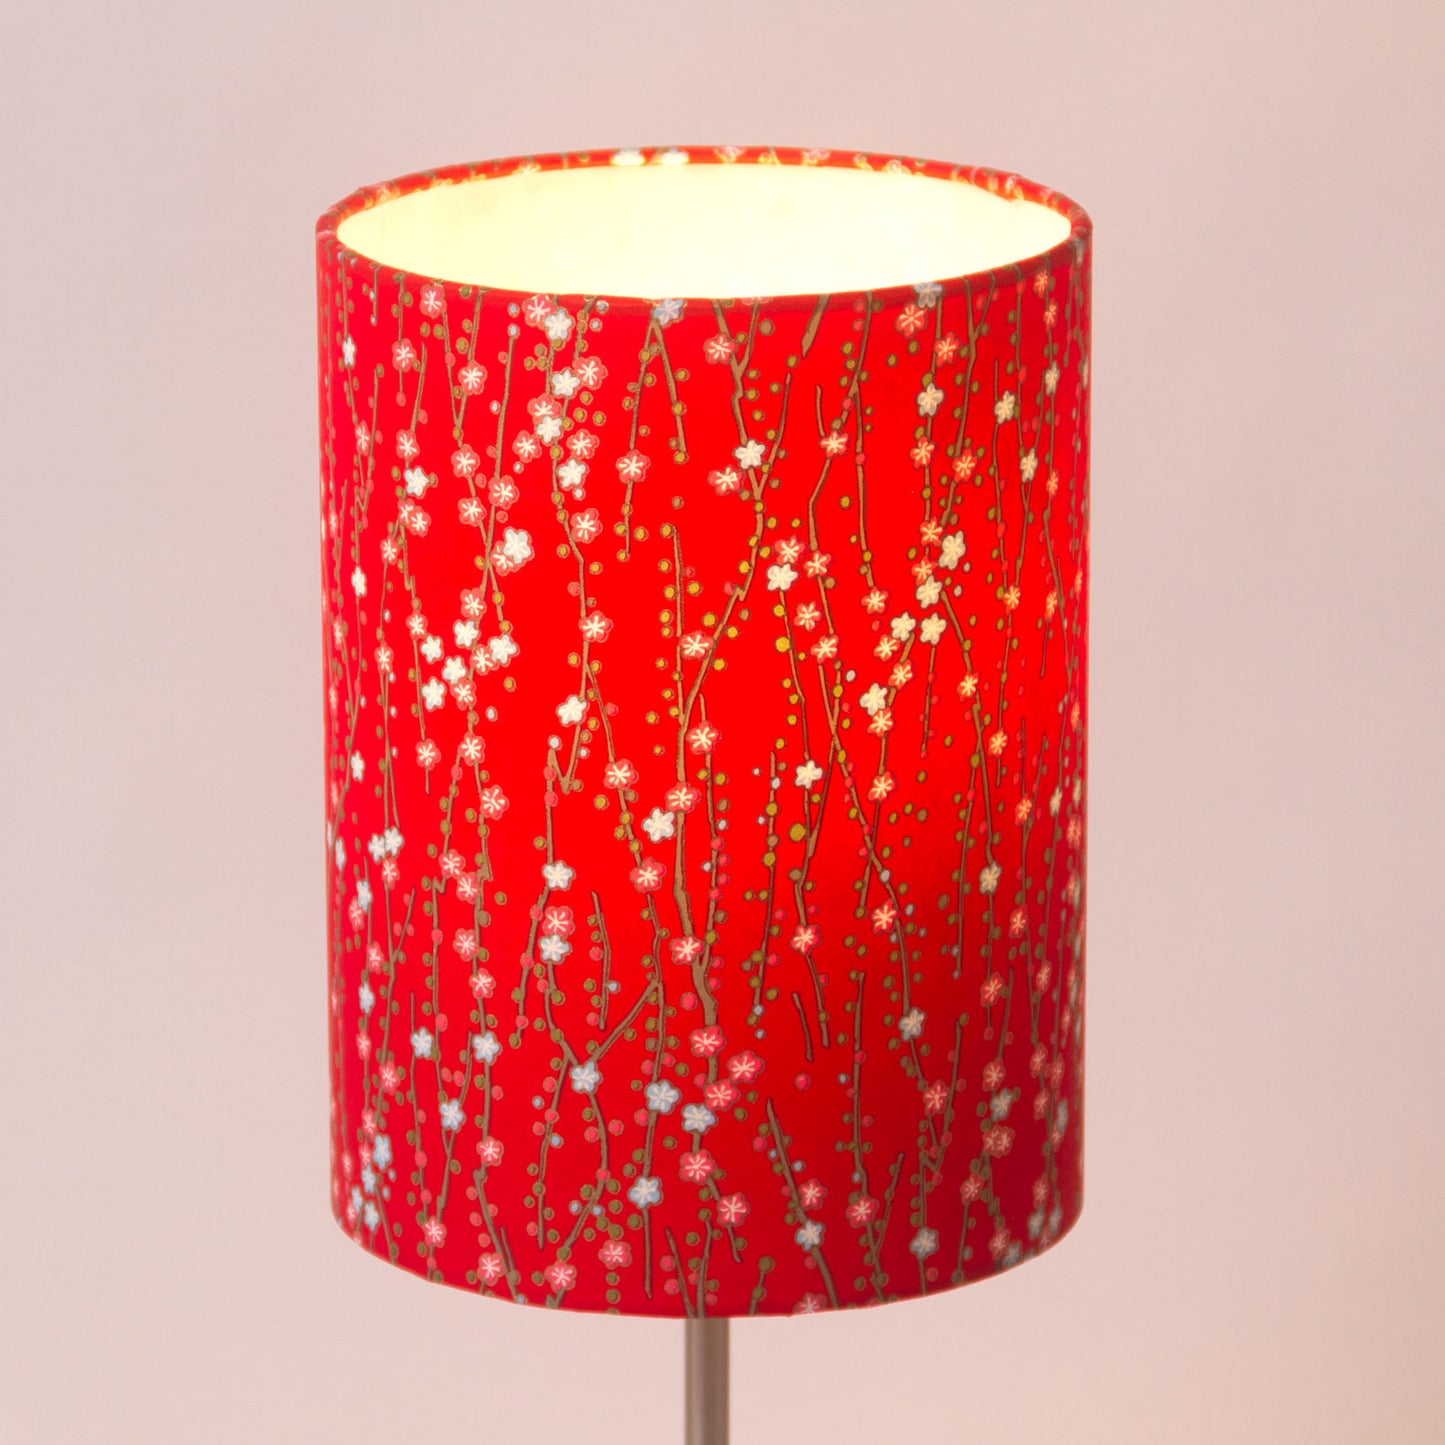 Conical Lamp Shade W01 - Red Daisies, 23cm(top) x 35cm(bottom) x 31cm(height)